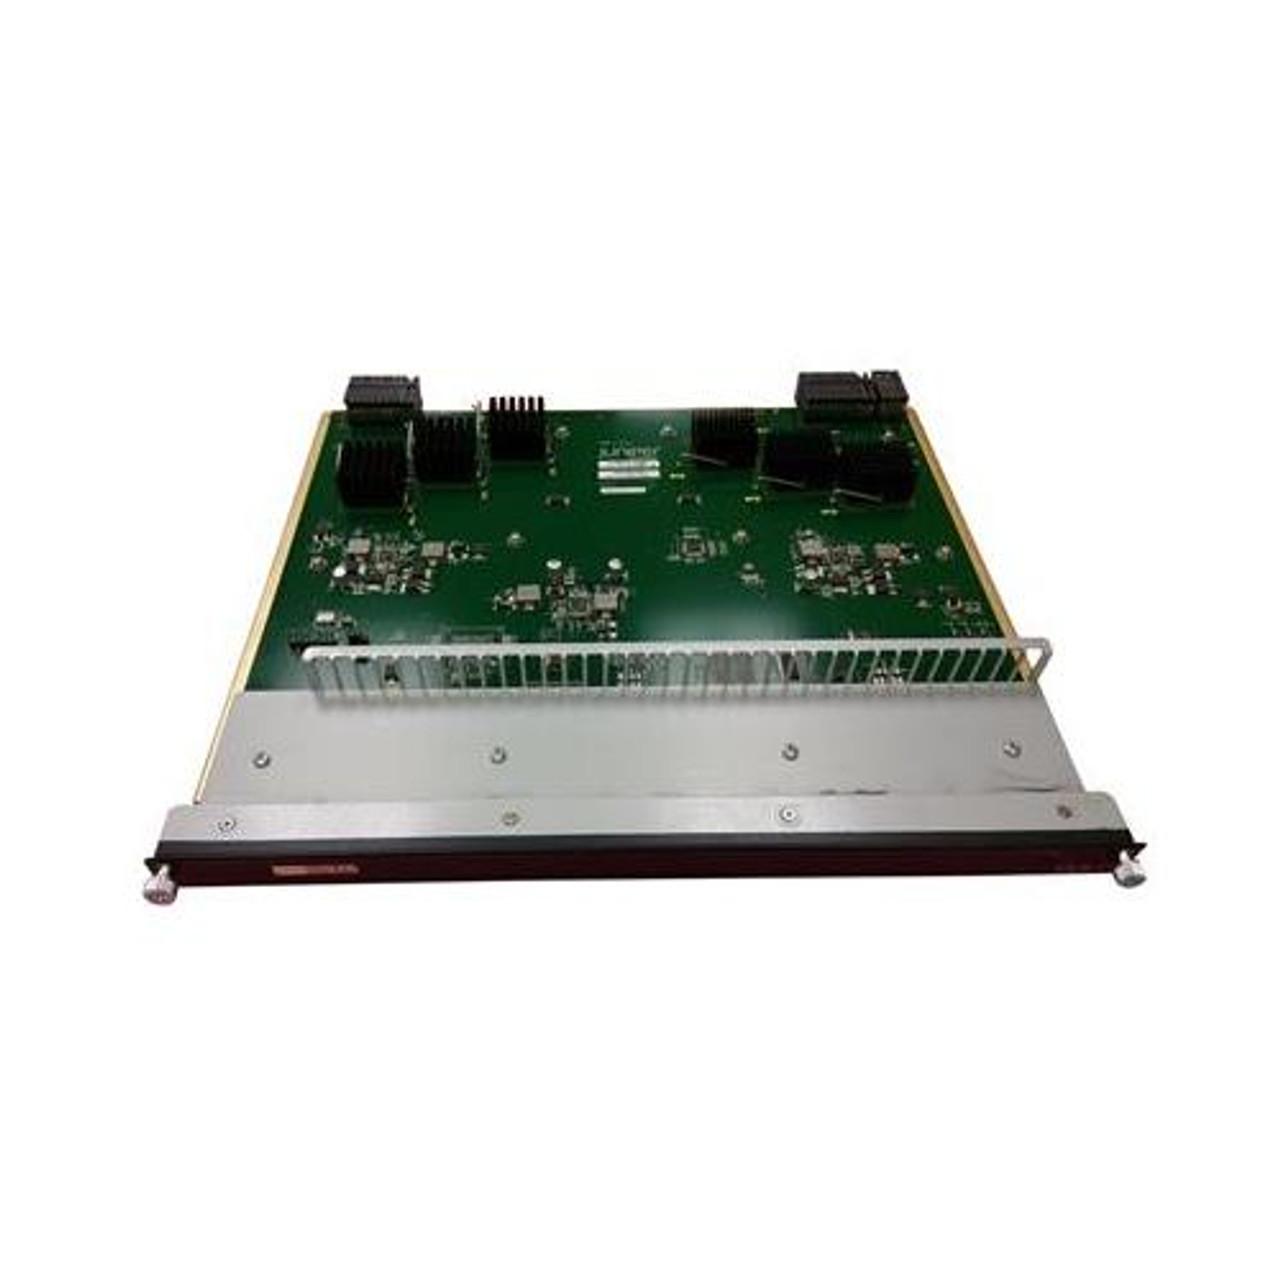 MX5TDC Juniper Mx5 Dc Chassis with Timing Sup Perp Incl Dual Power Sup Mic-3d-20ge-SFP (Refurbished)